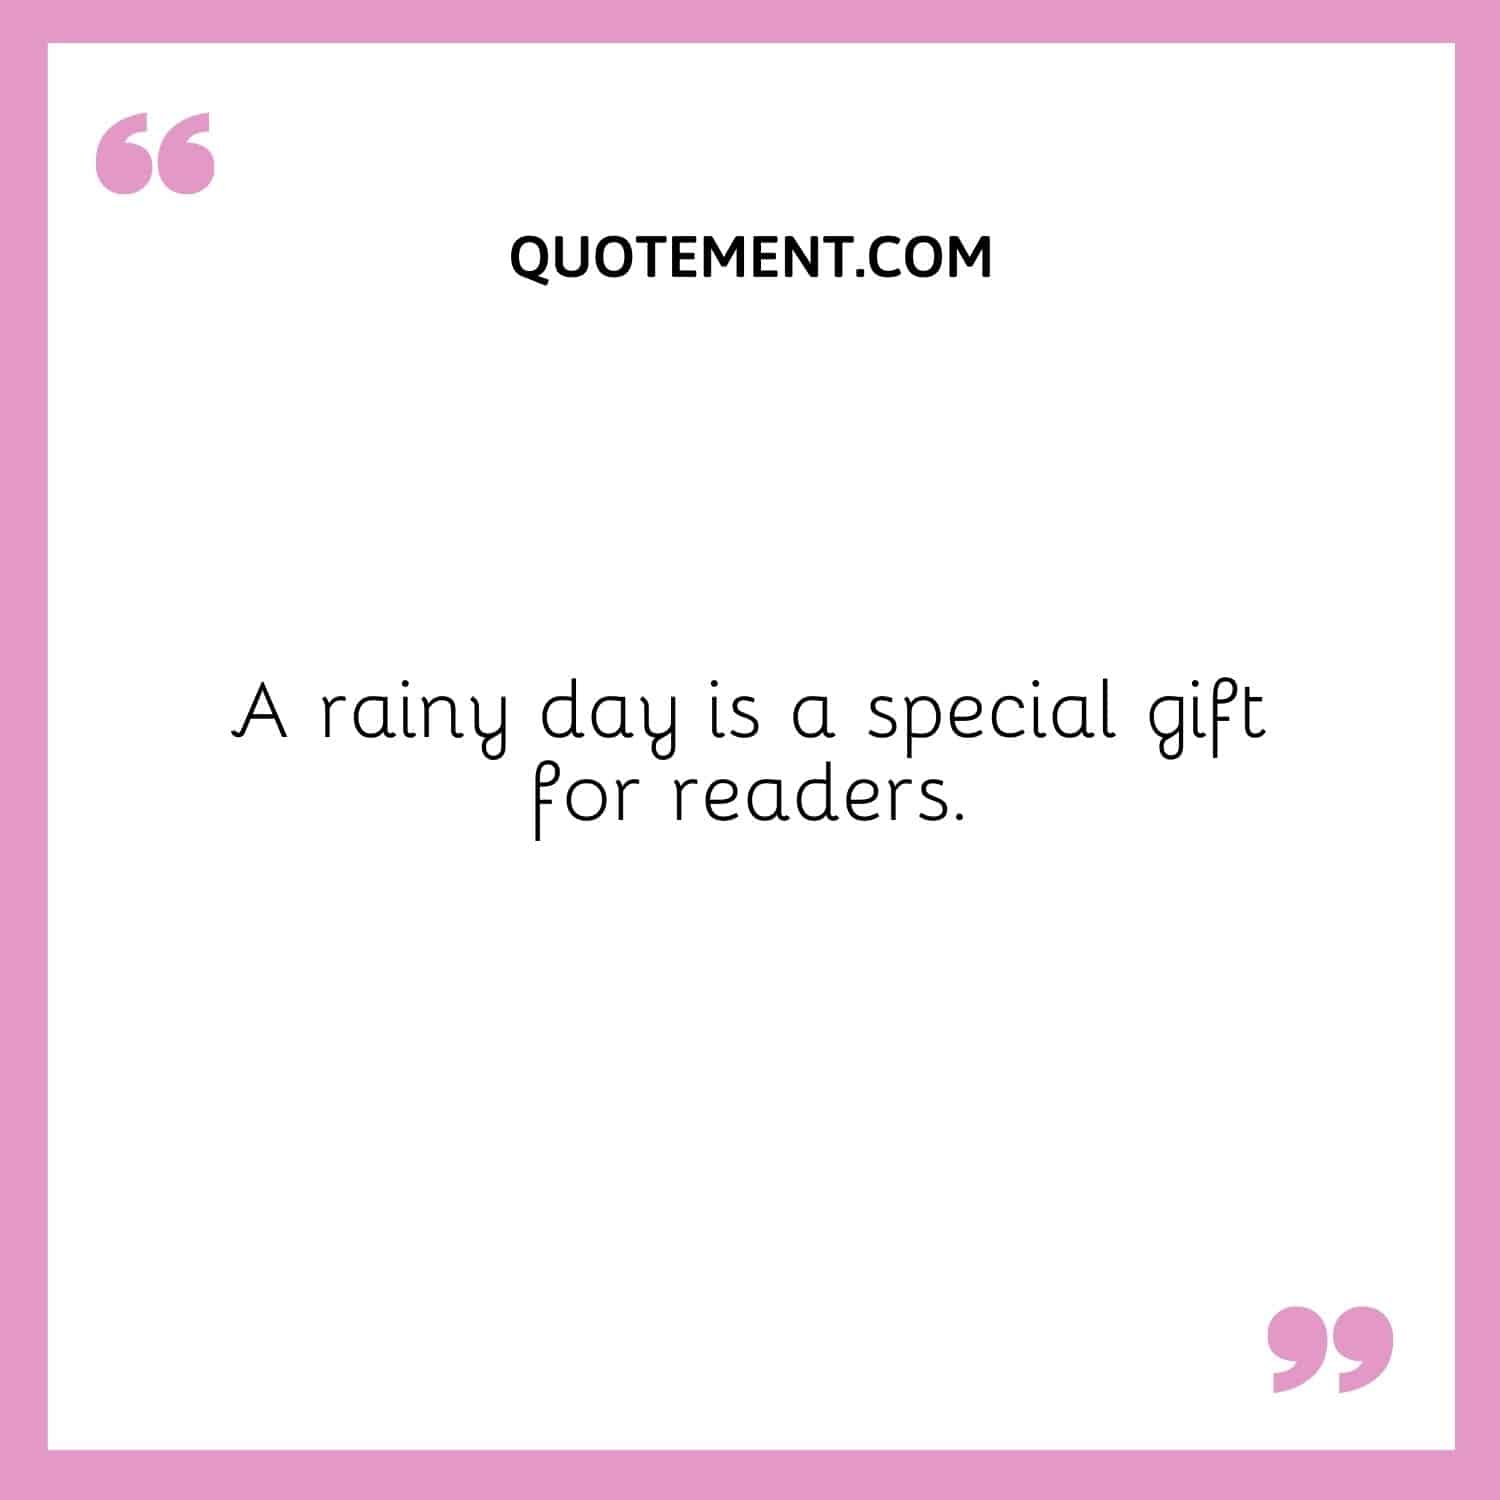 A rainy day is a special gift for readers.